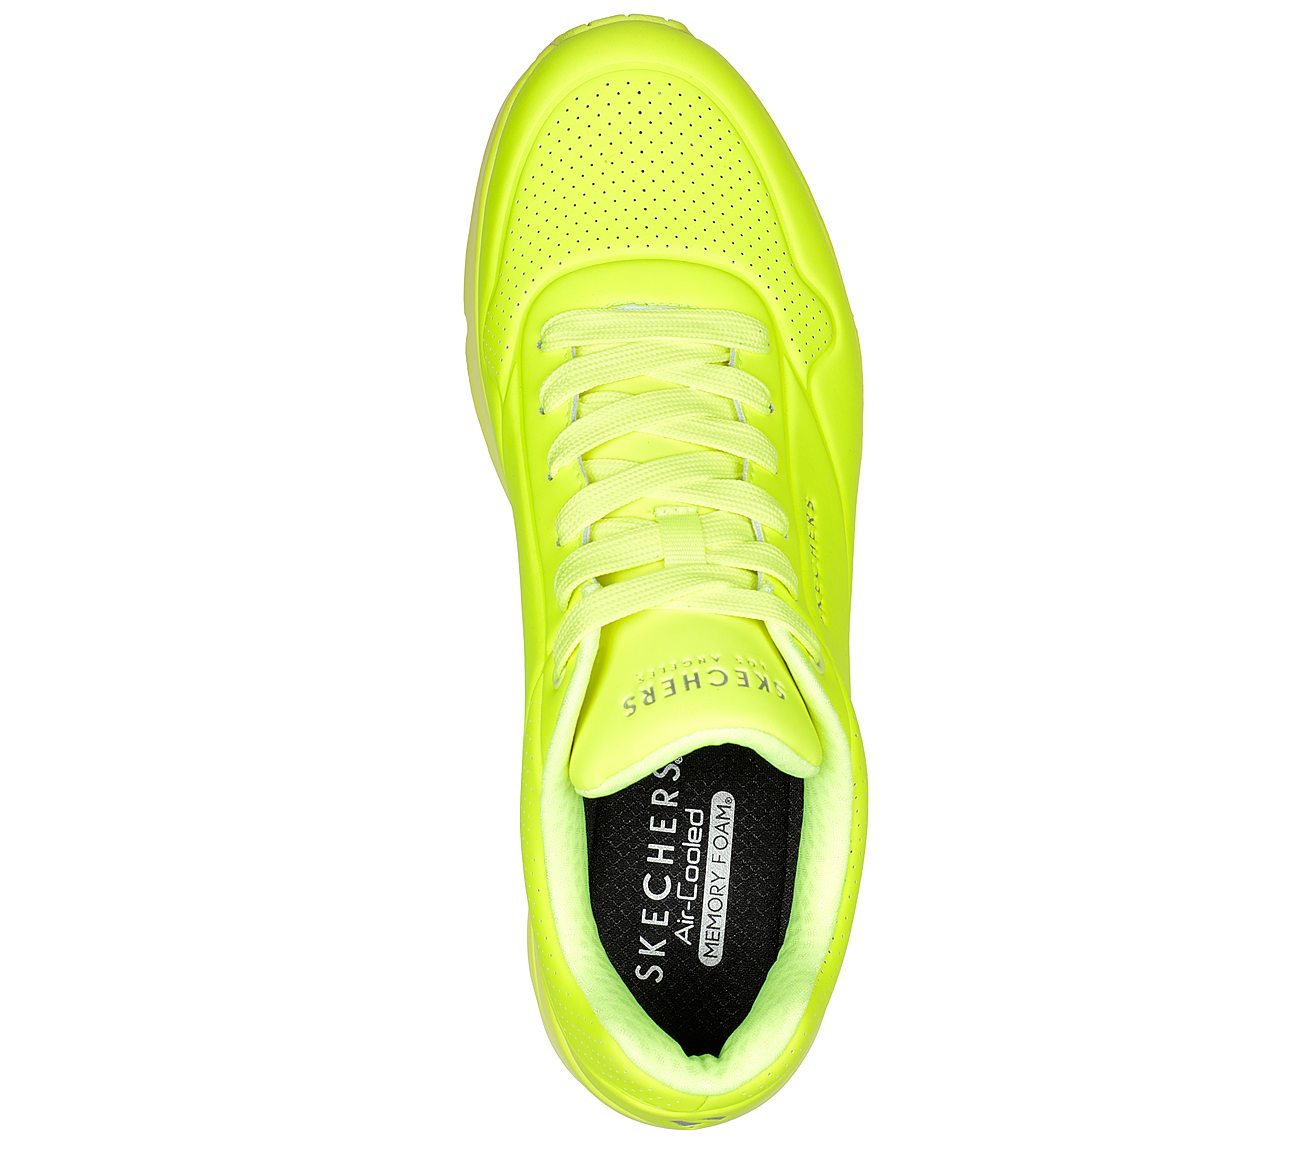 UNO - STAND ON AIR, LIME Footwear Top View